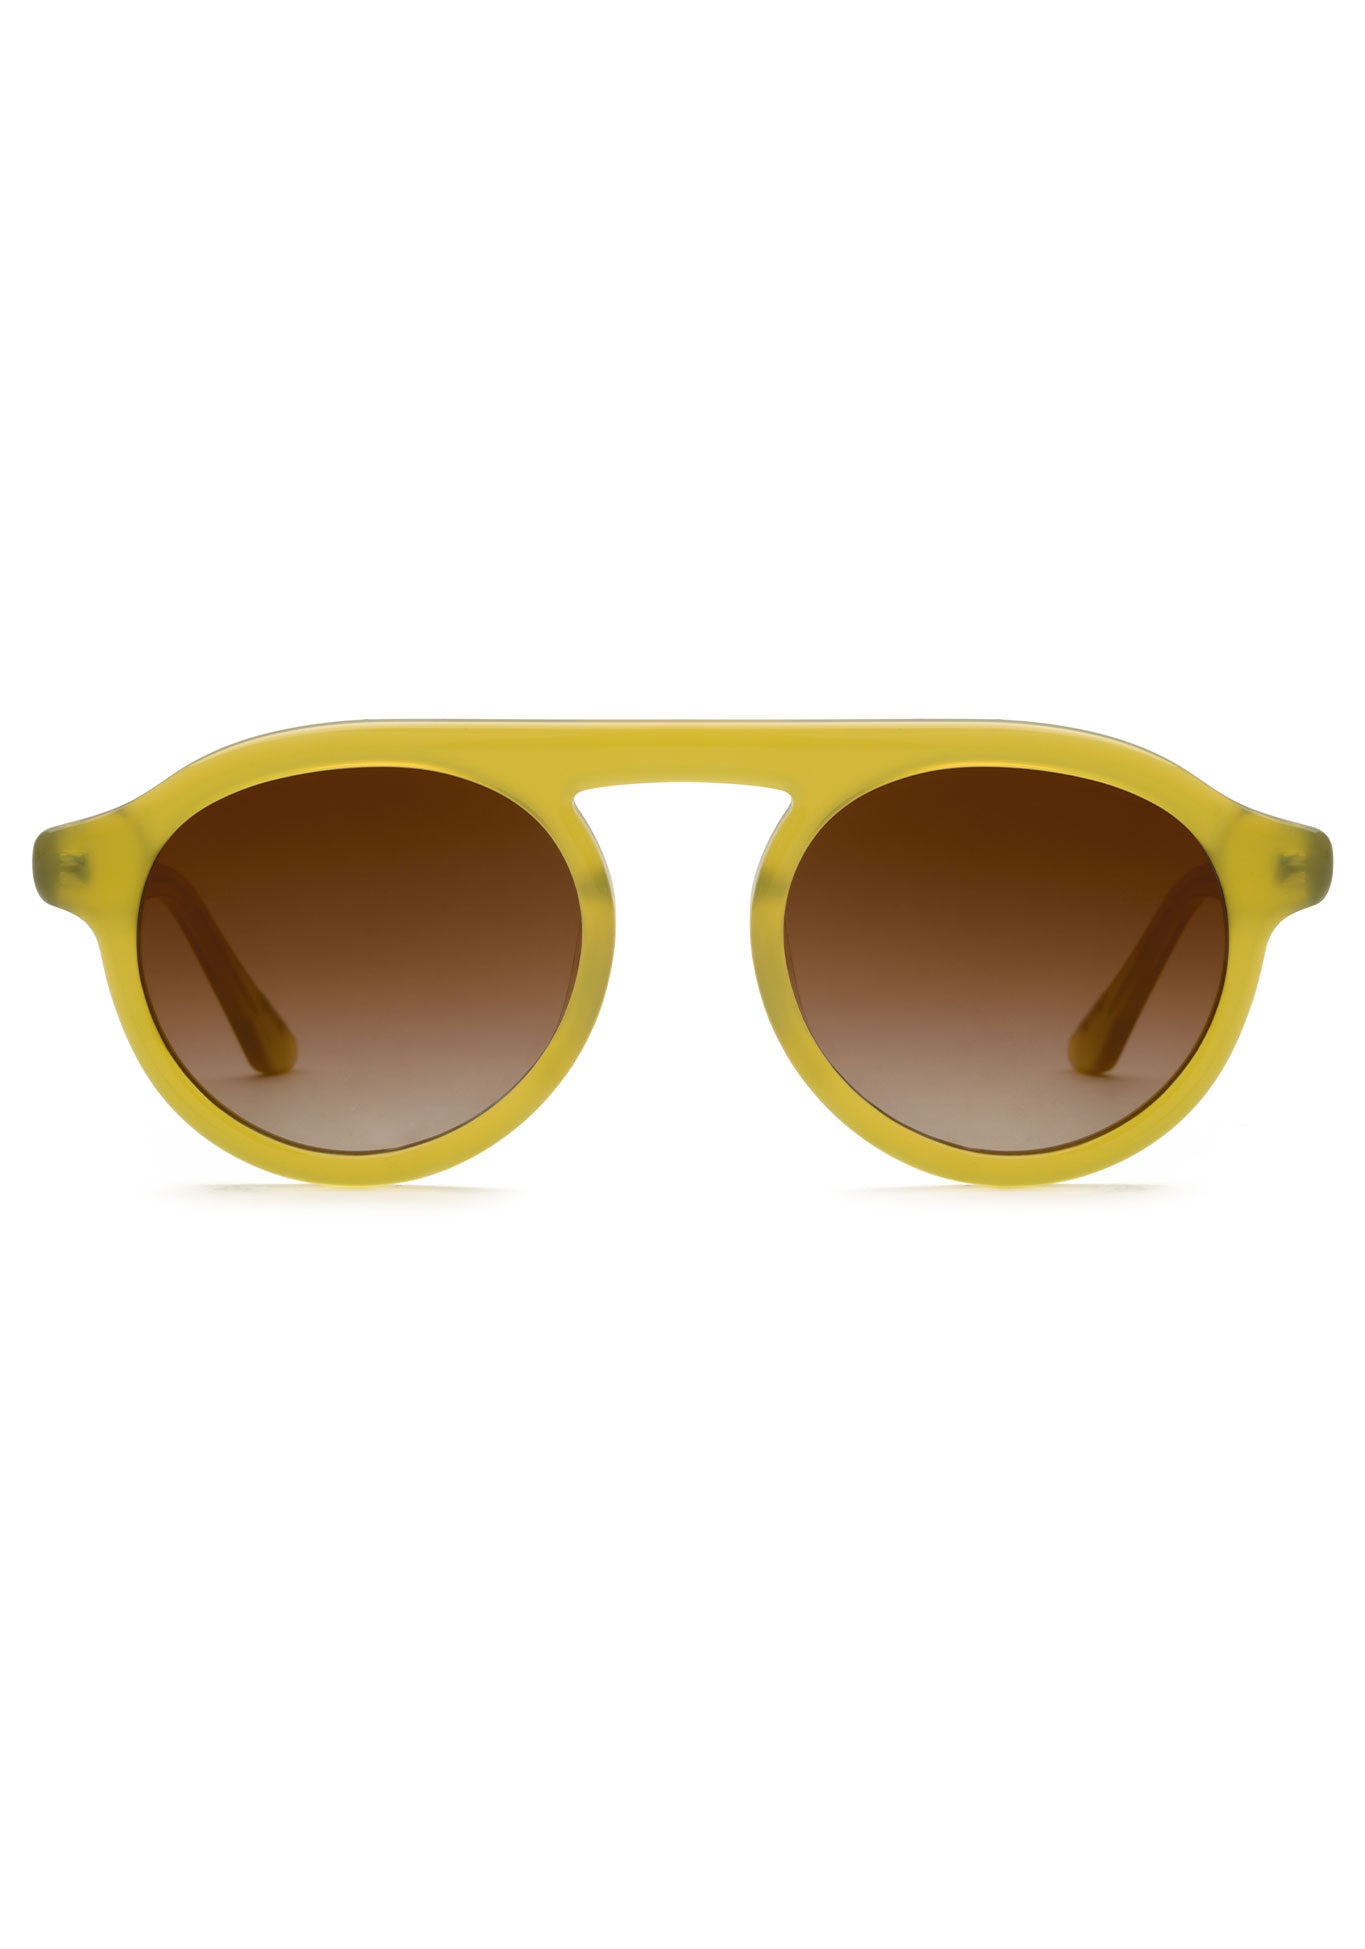 KREWE SUNGLASSES - CAMERON | Chartreuse handcrafted, luxury yellow acetate round frames 